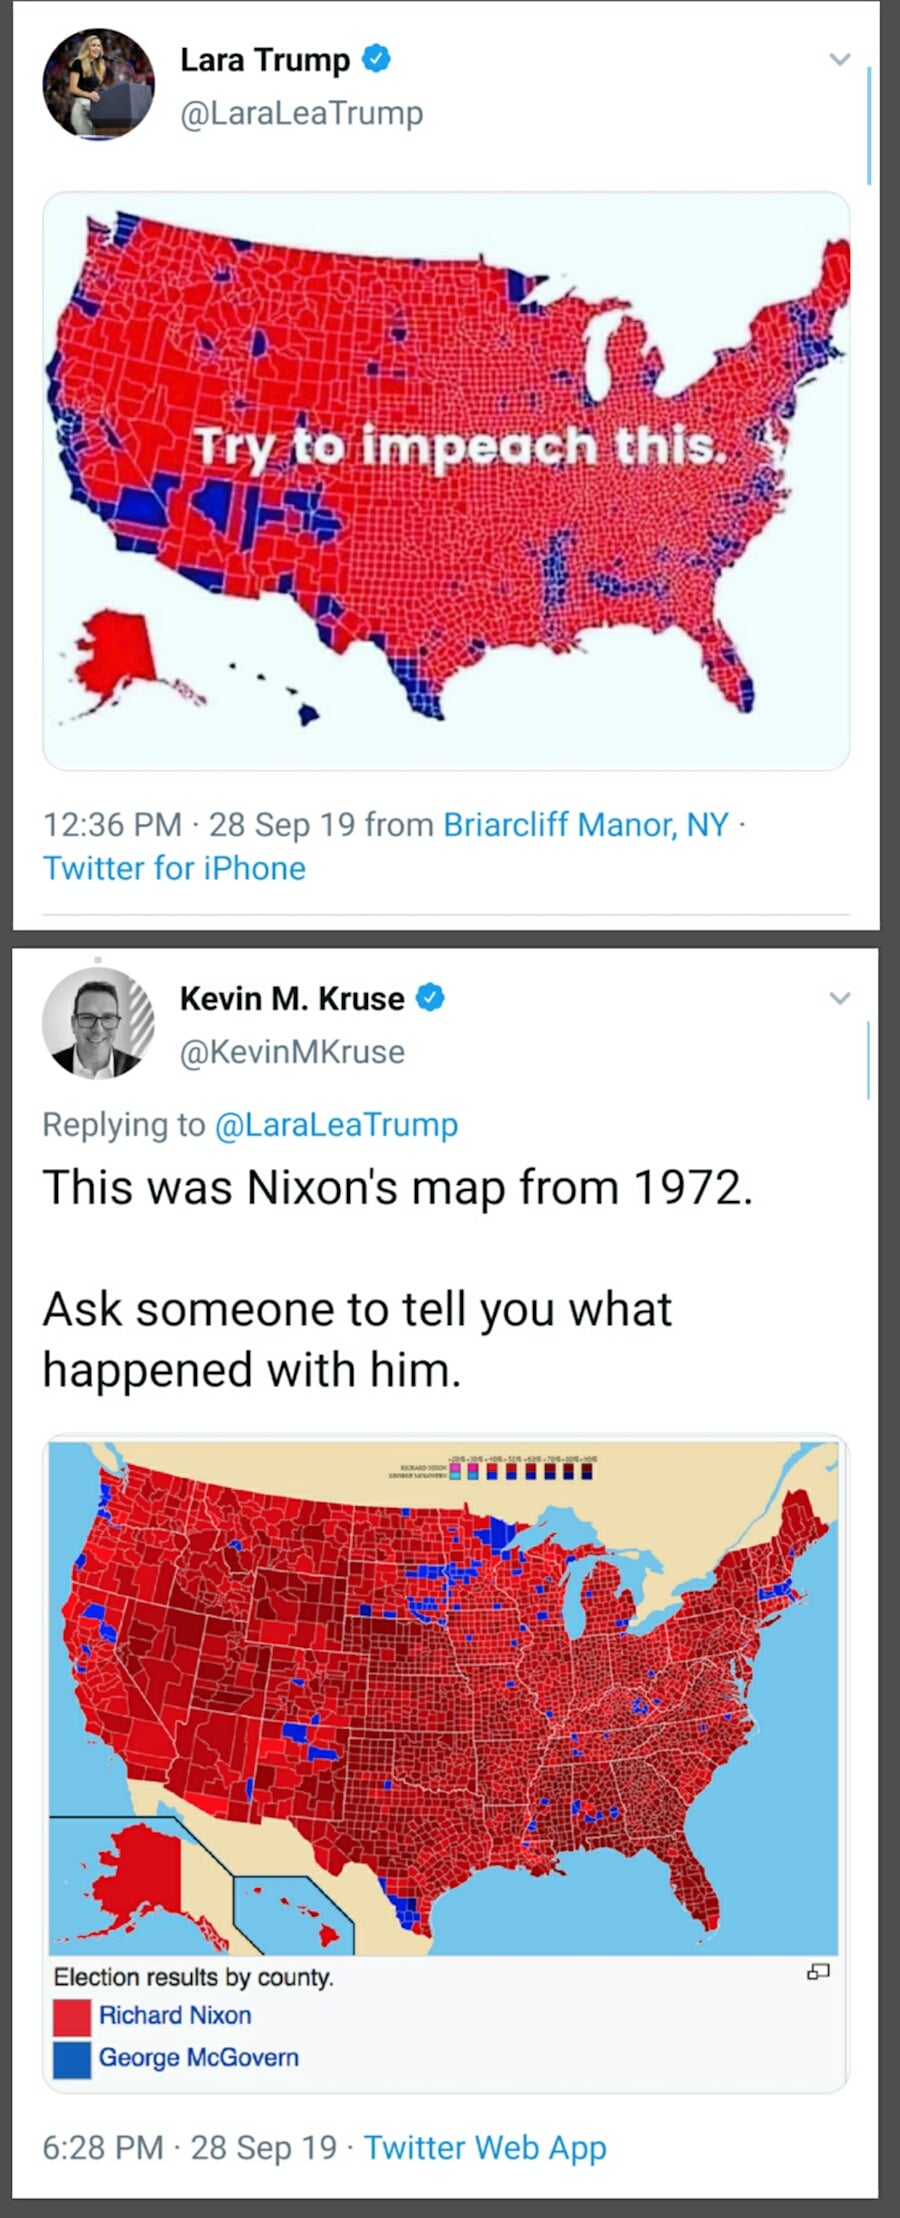 political political-memes political text: Lara Trump @LaraLeaTrump ritoimpeaeh this. 12:36 PM 28 sep 19 from Briarcliff Manor, NY • Kevin M. Kruse @KevinMKruse Replying to@LaraLeaTrump This was Nixon's map from 1972 Ask someone to tell you what happened with him results by county Nixon orge McGovern '1 • 28 sep 19 • Twitter web App 